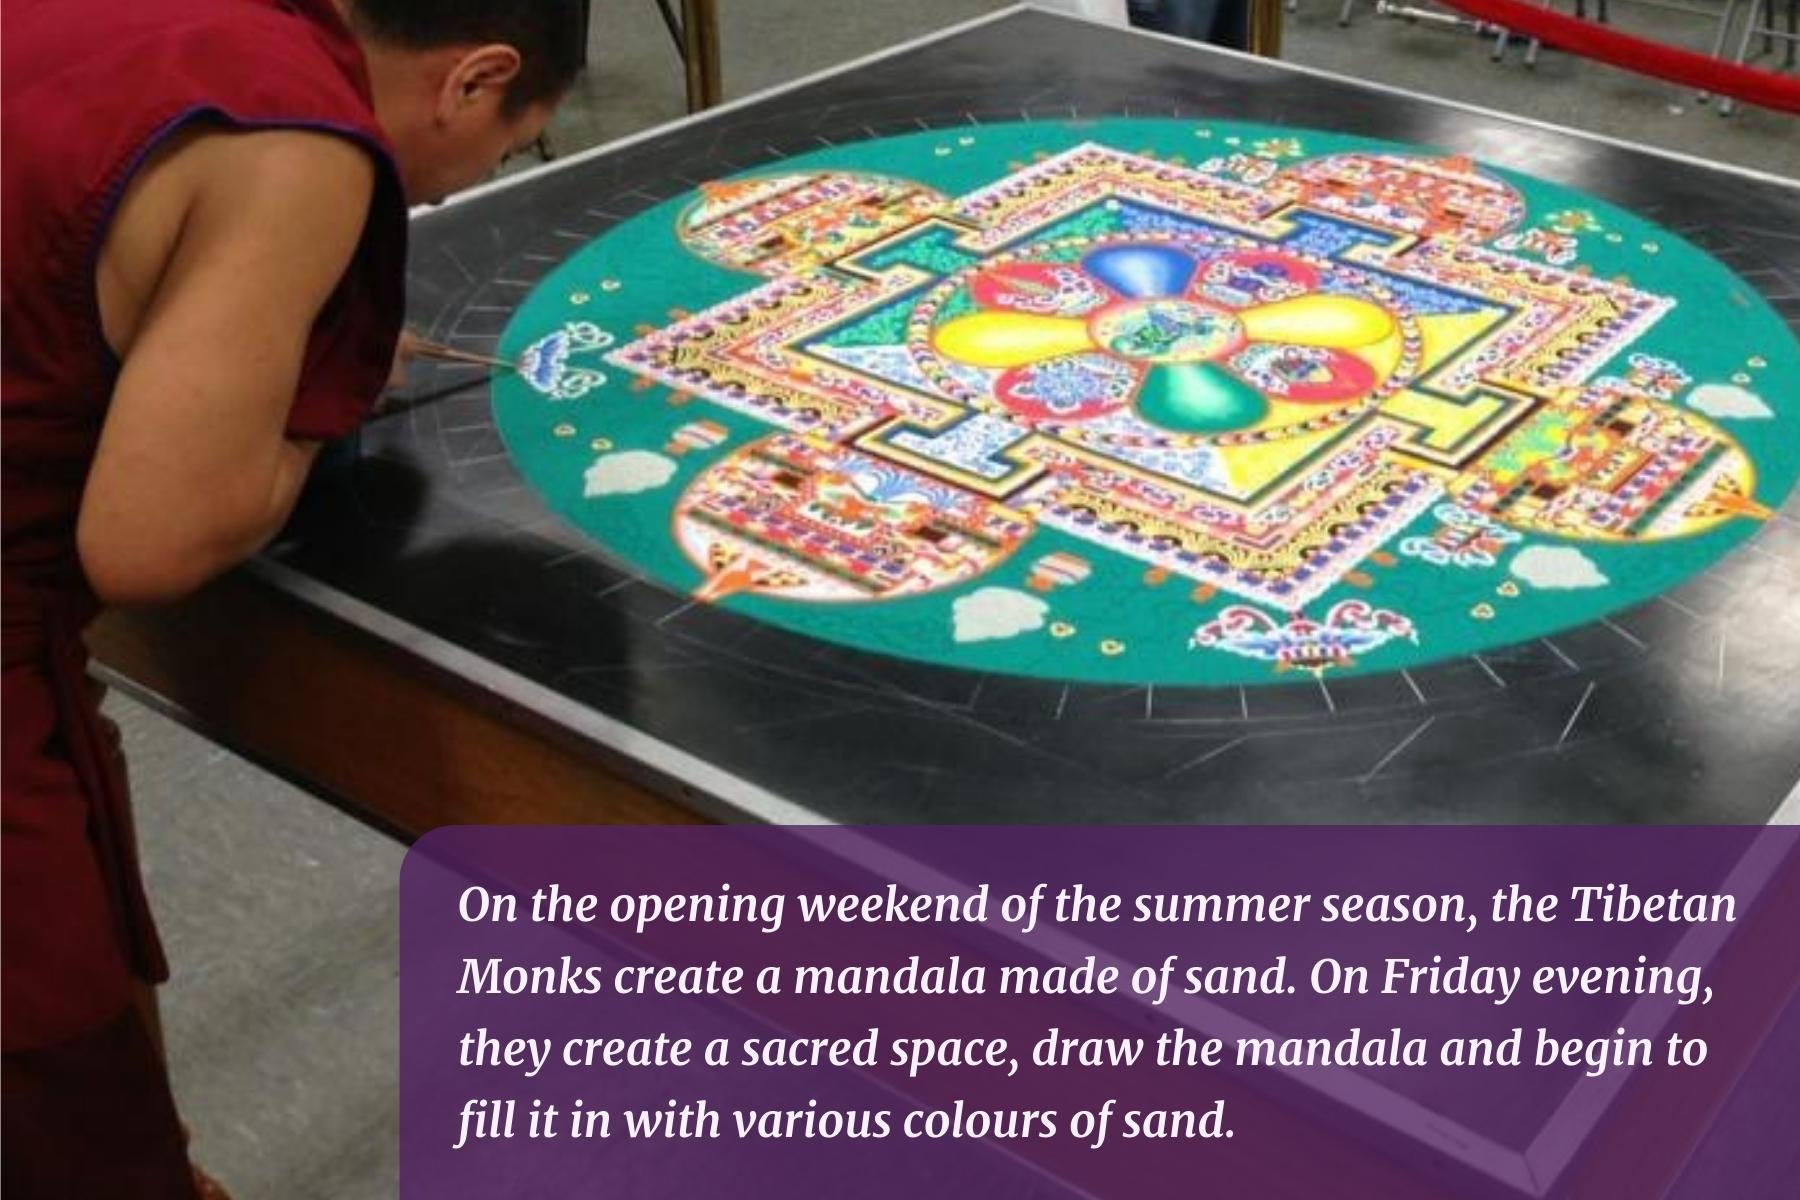 On the opening weekend of the summer season, the Tibetan Monks create a mandala made of sand. On Friday evening, they create a sacred space, draw the mandala and begin to fill it in with various colours of sand.